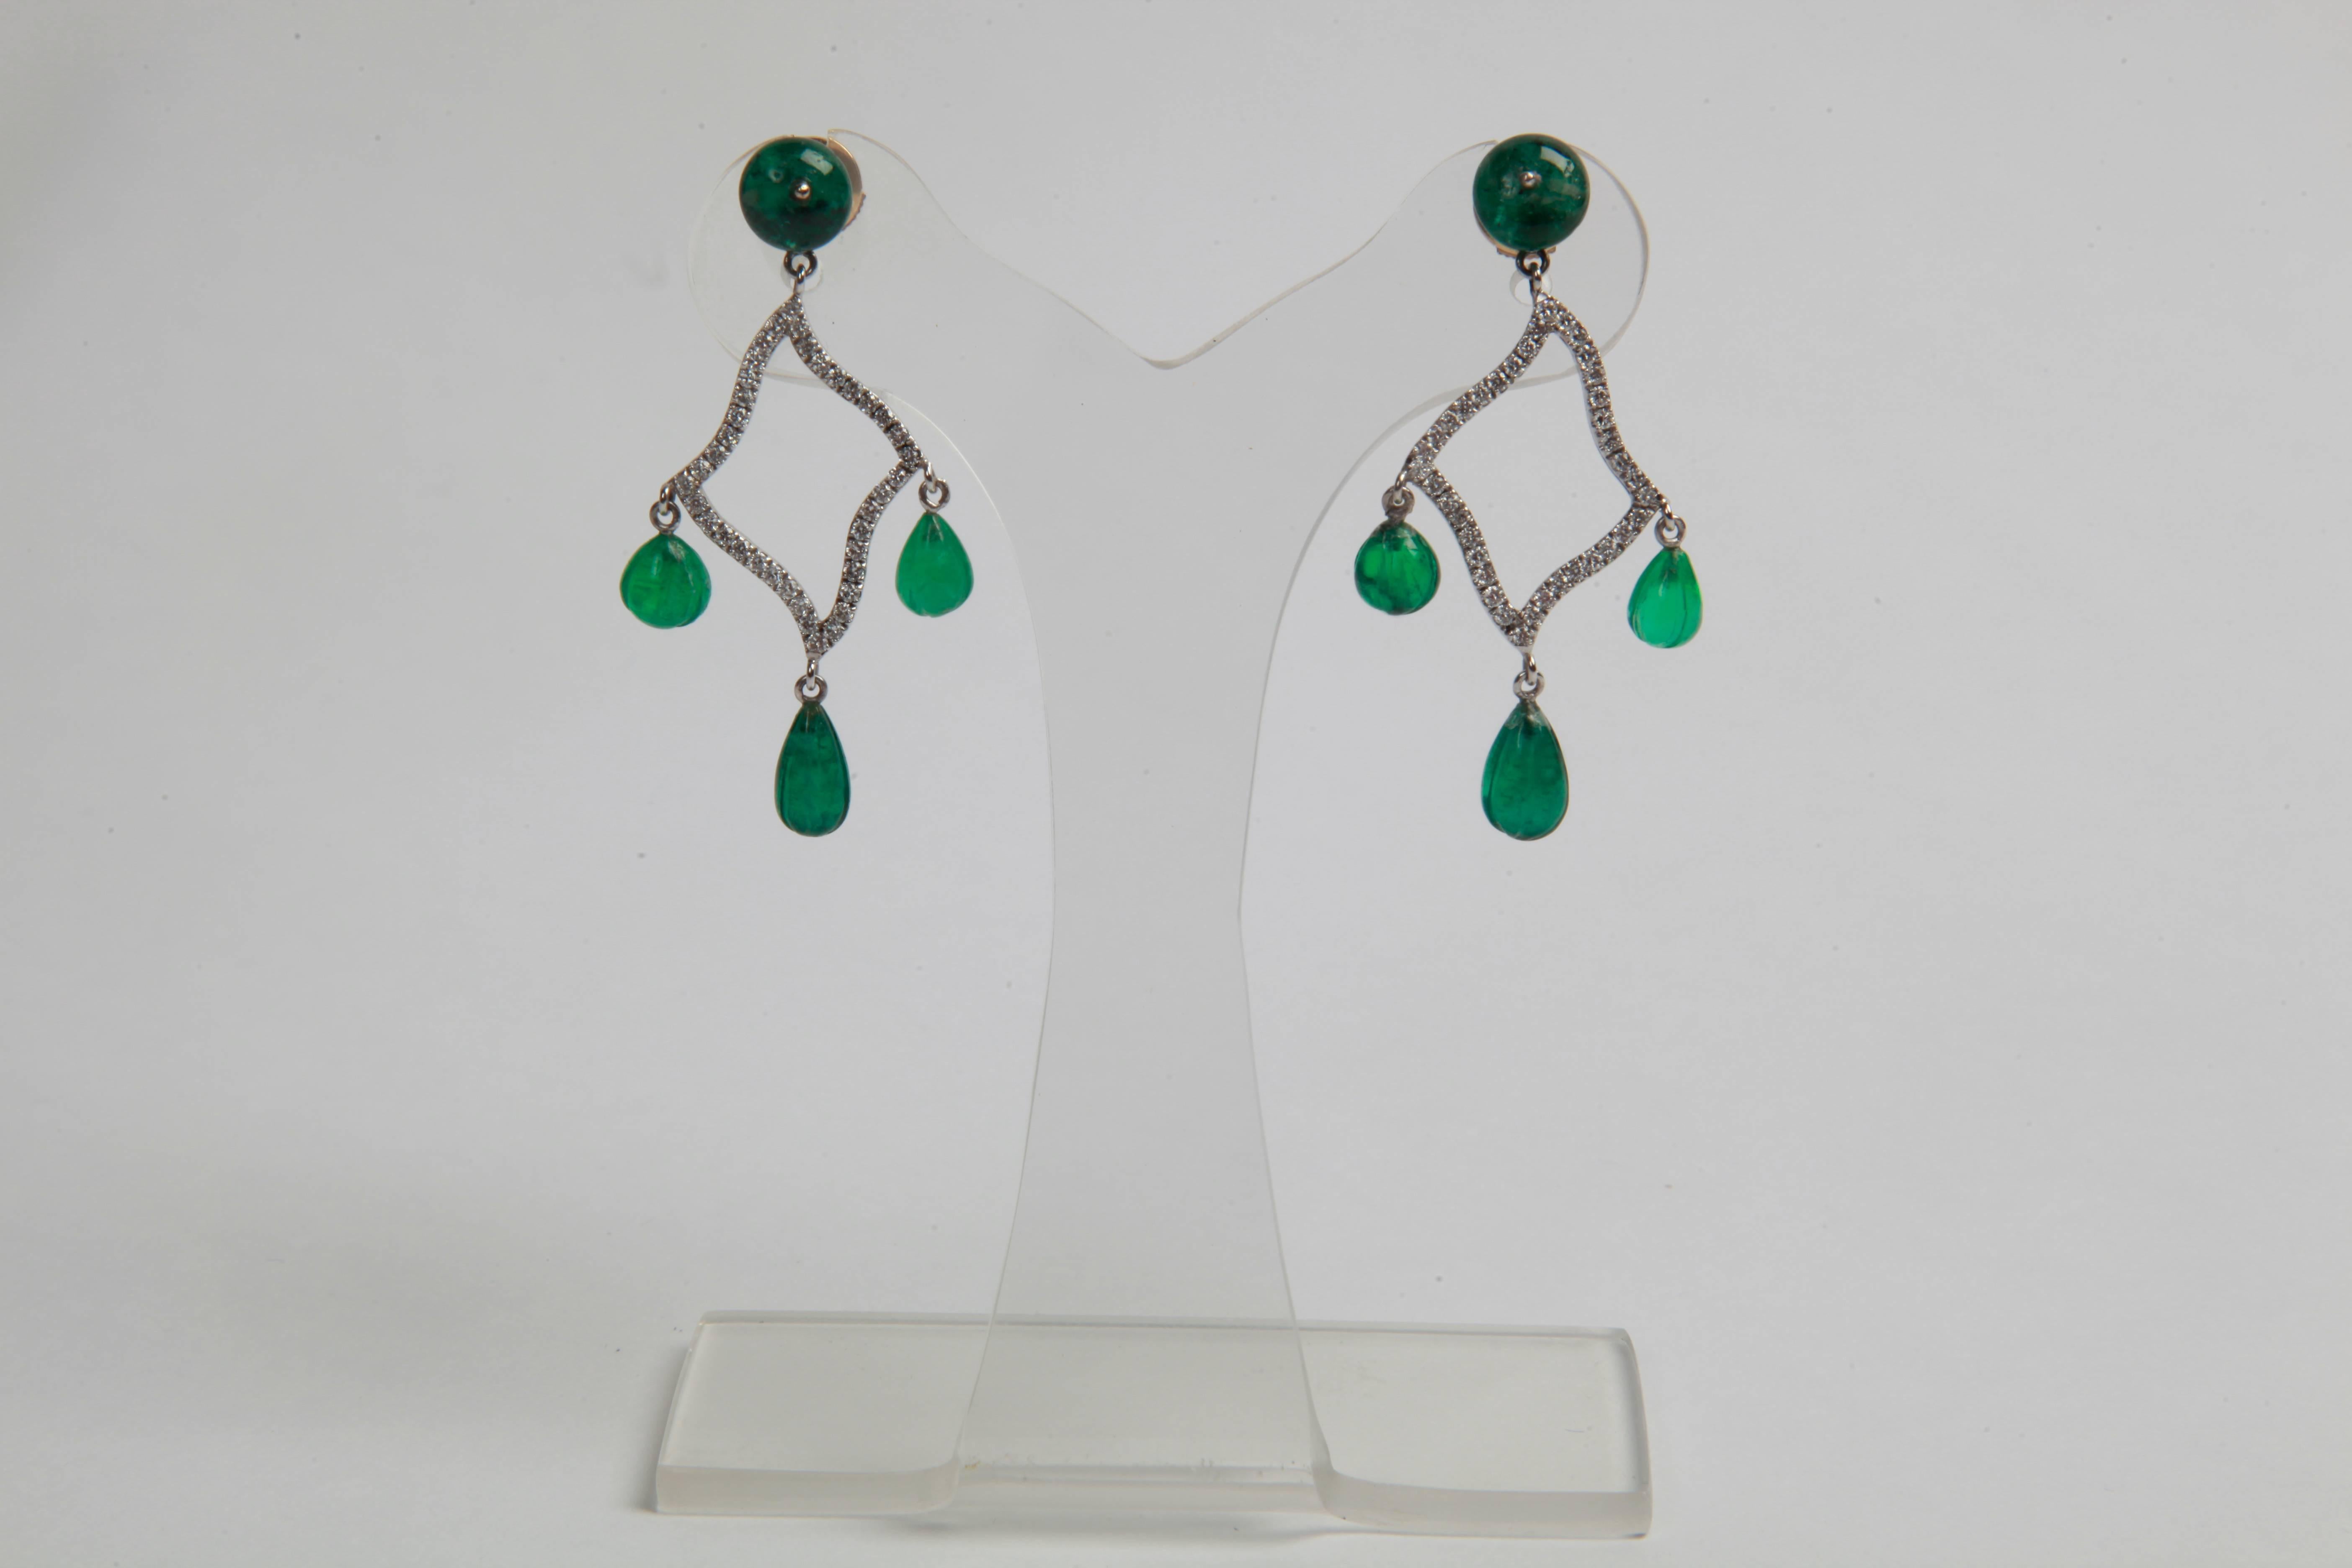 These art Deco style earrings are a unique piece.
They will brighten your visage and your look.
Emeralds beads: 13.11 carats
White diamonds: 0.86carat
Alpa security systemPrice without local taxes.